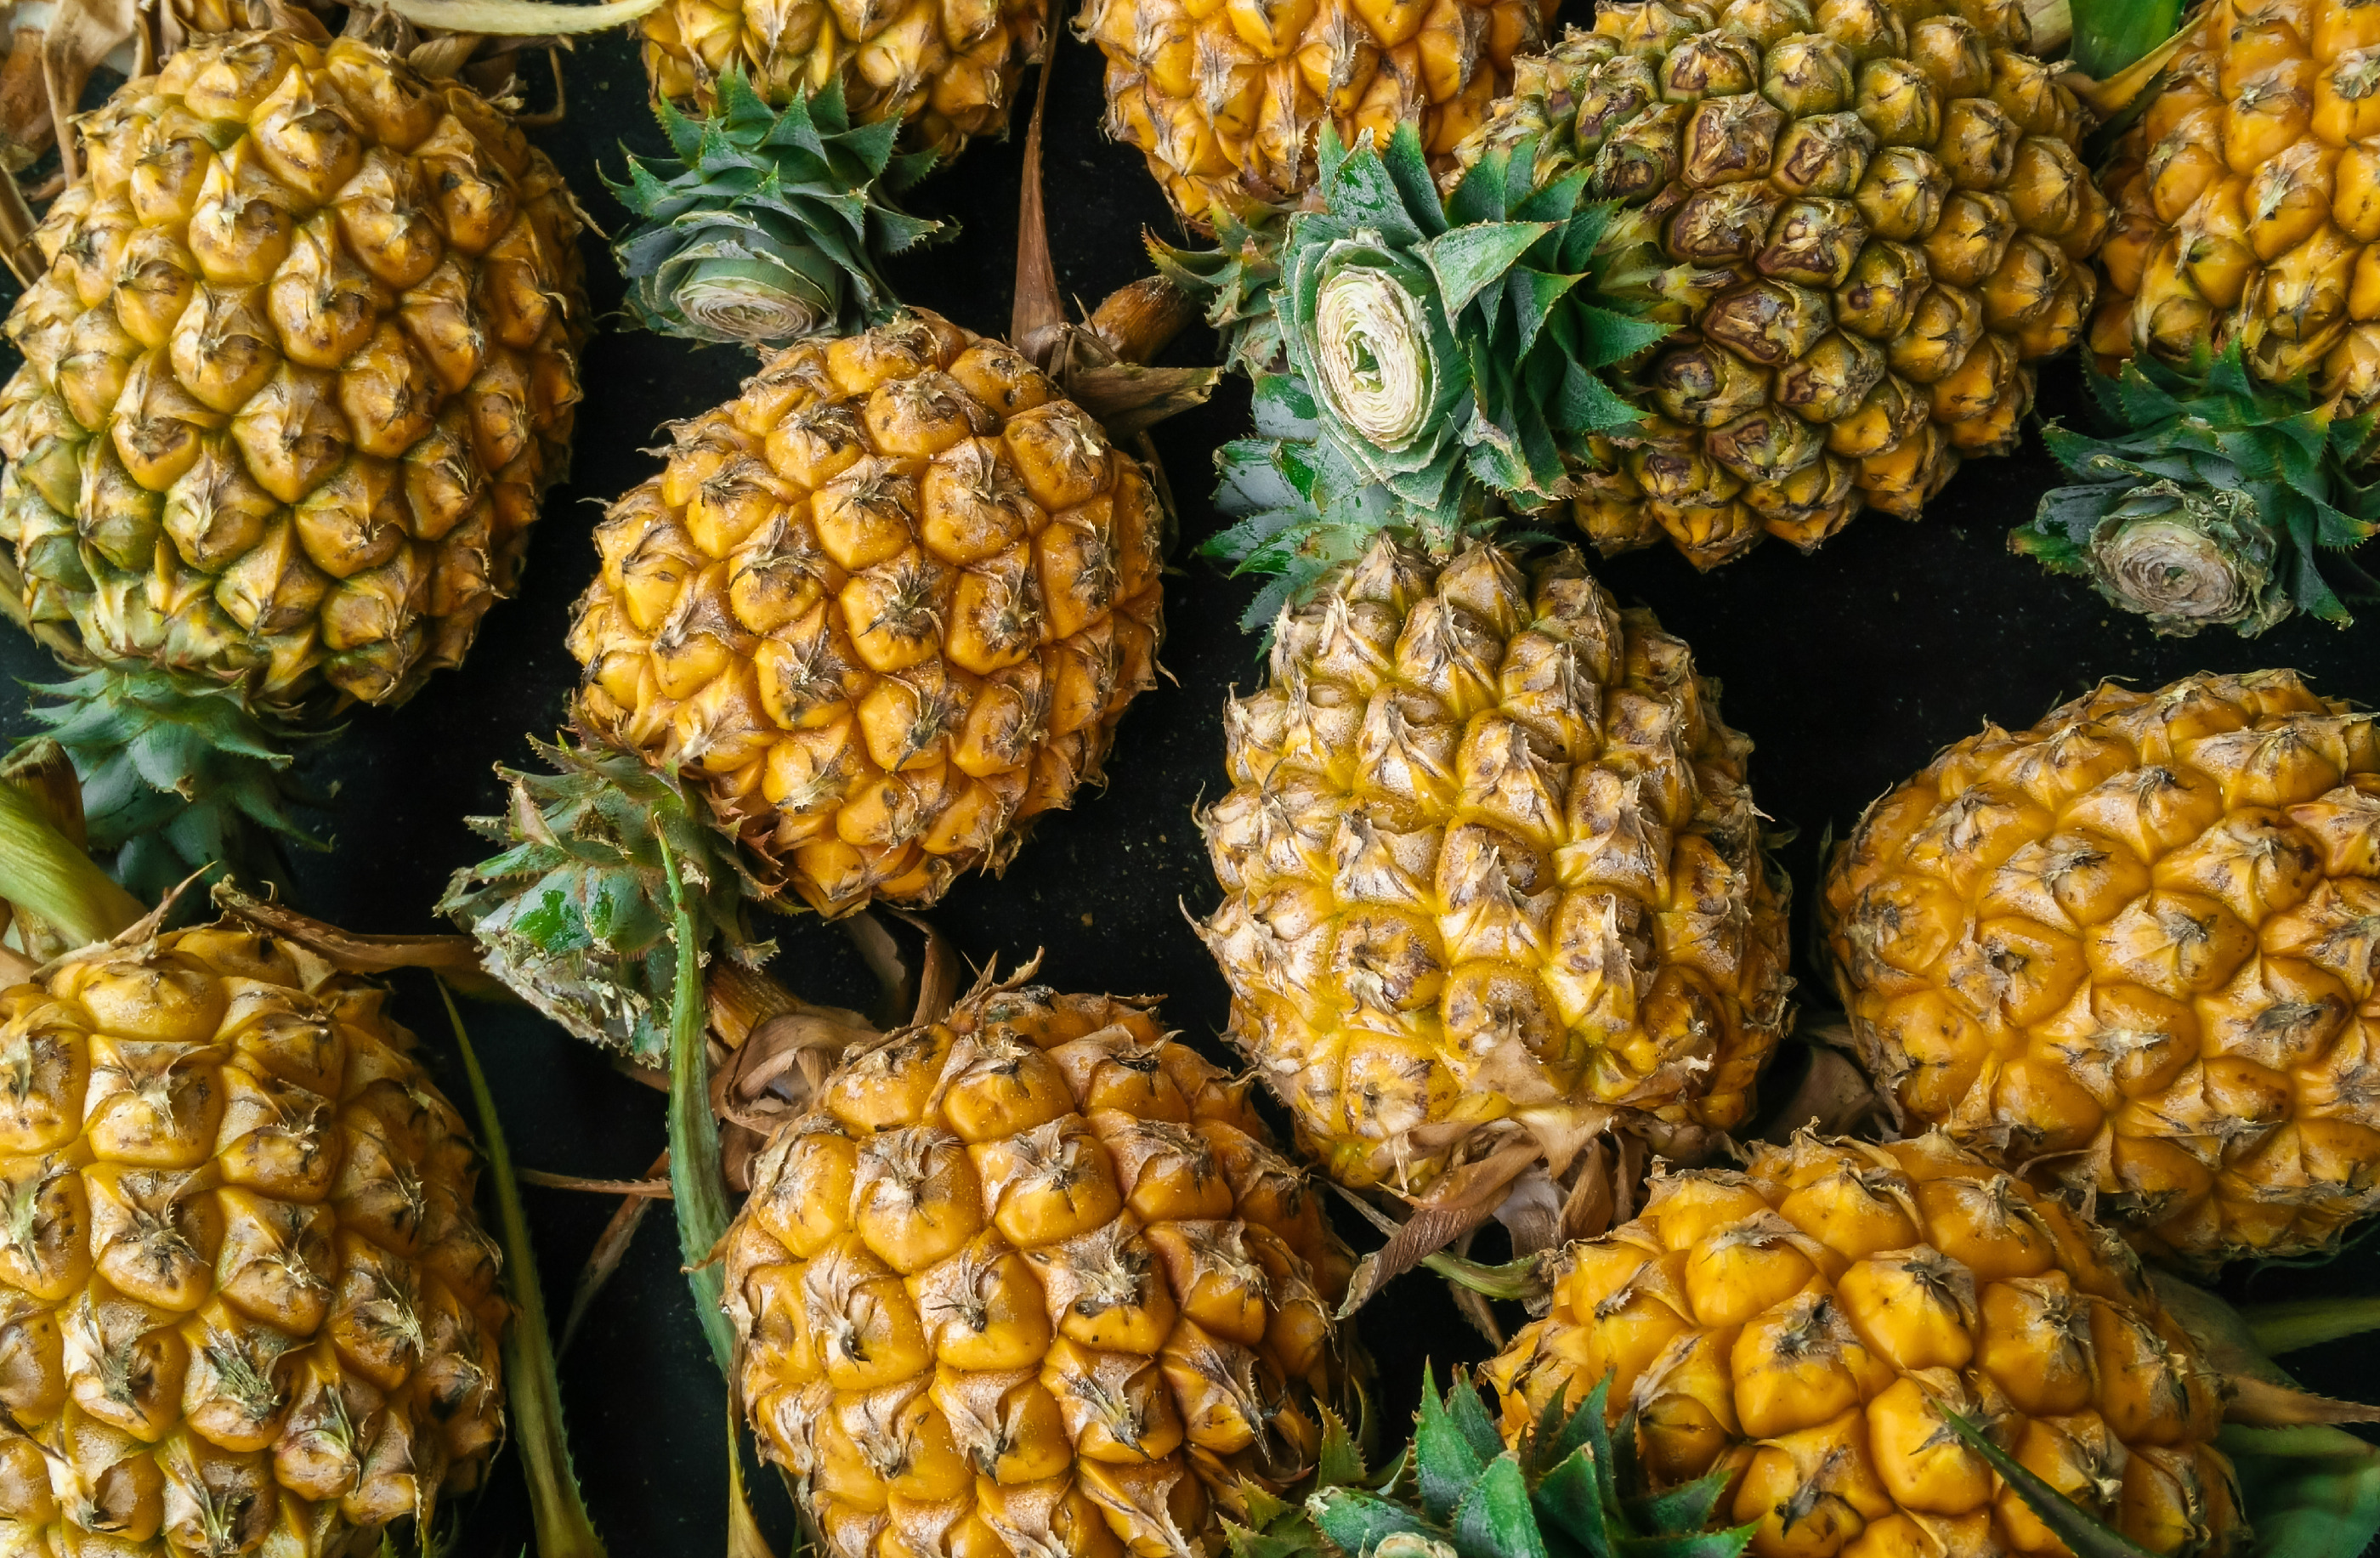 BROMELAIN: A plant origin proteolytic enzyme, derived from the stem of pineapples.